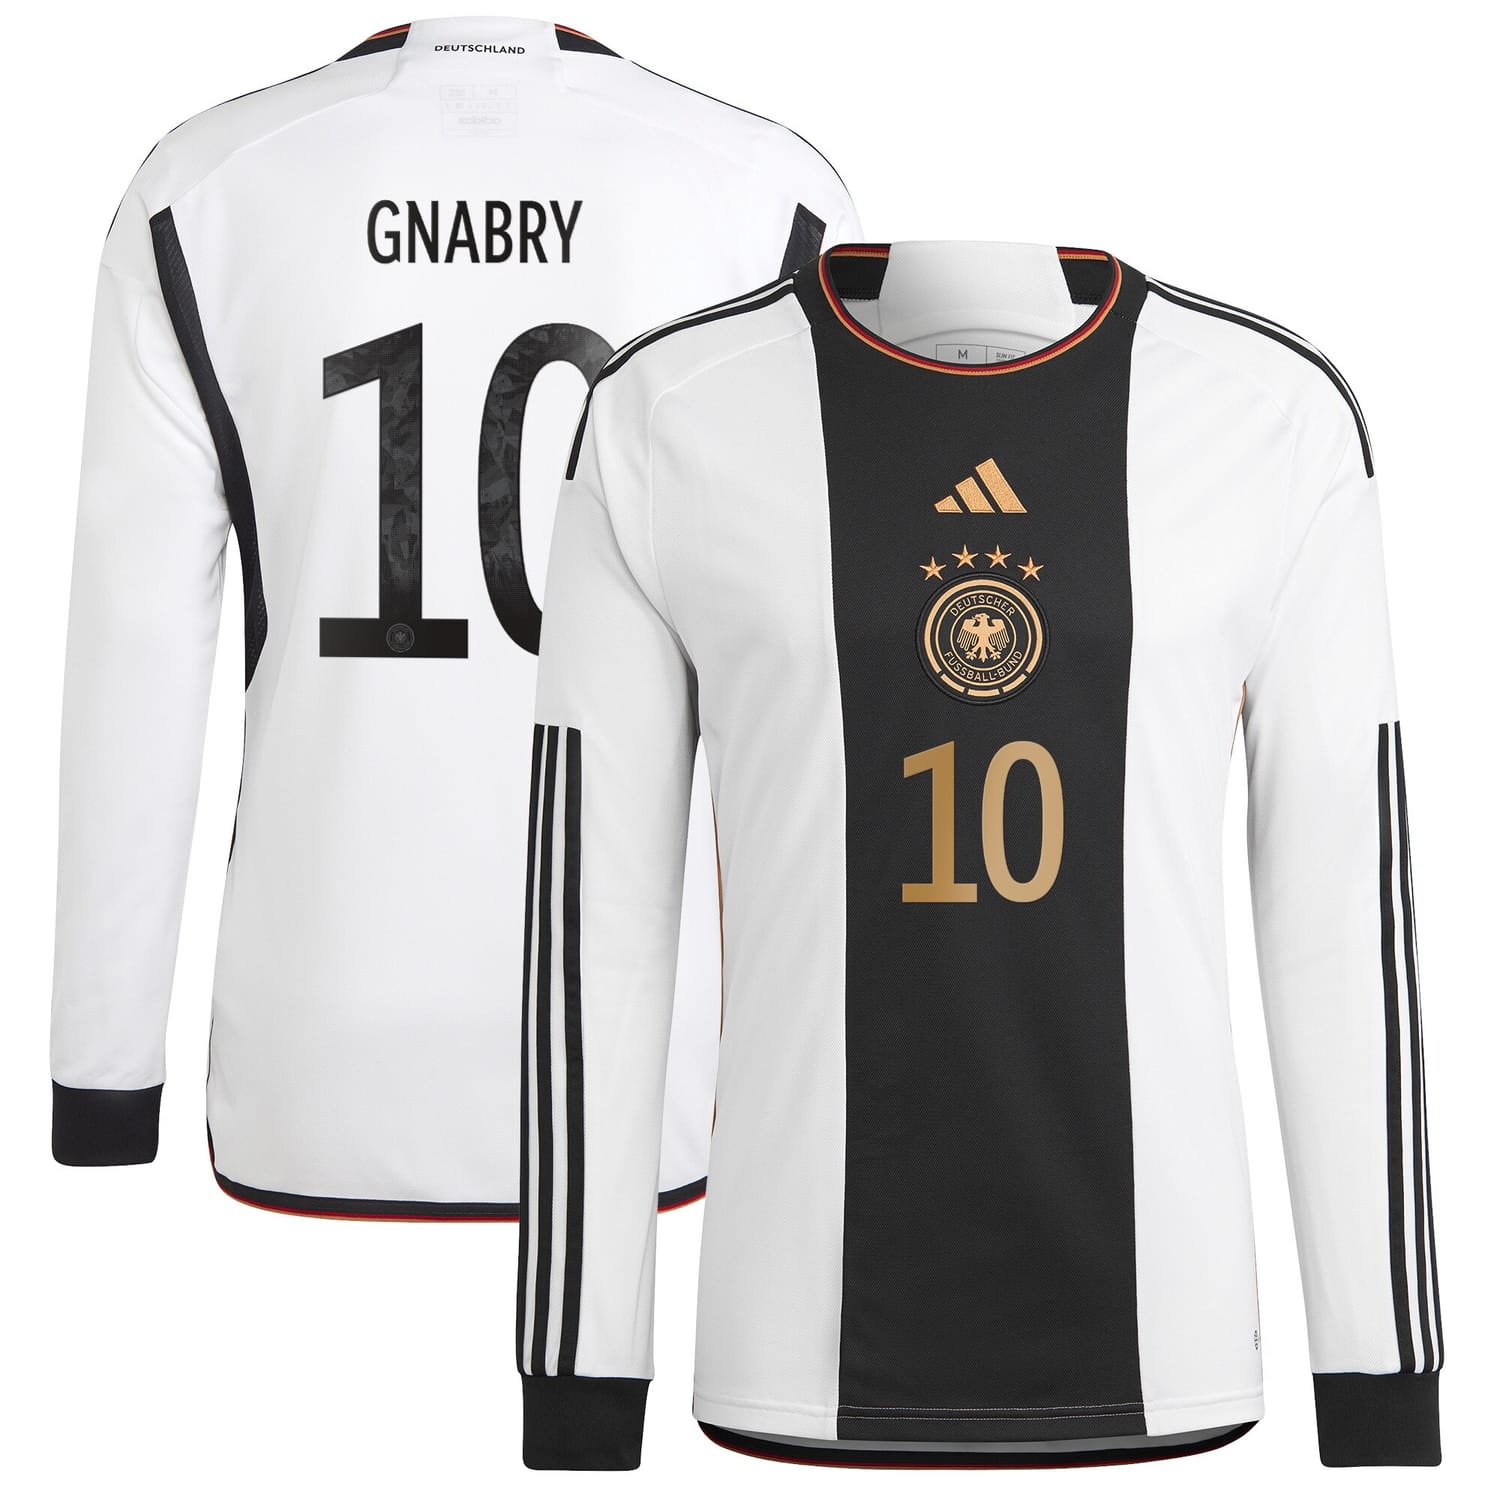 Germany National Team Home Jersey Shirt Long Sleeve player Serge Gnabry 10 printing for Men